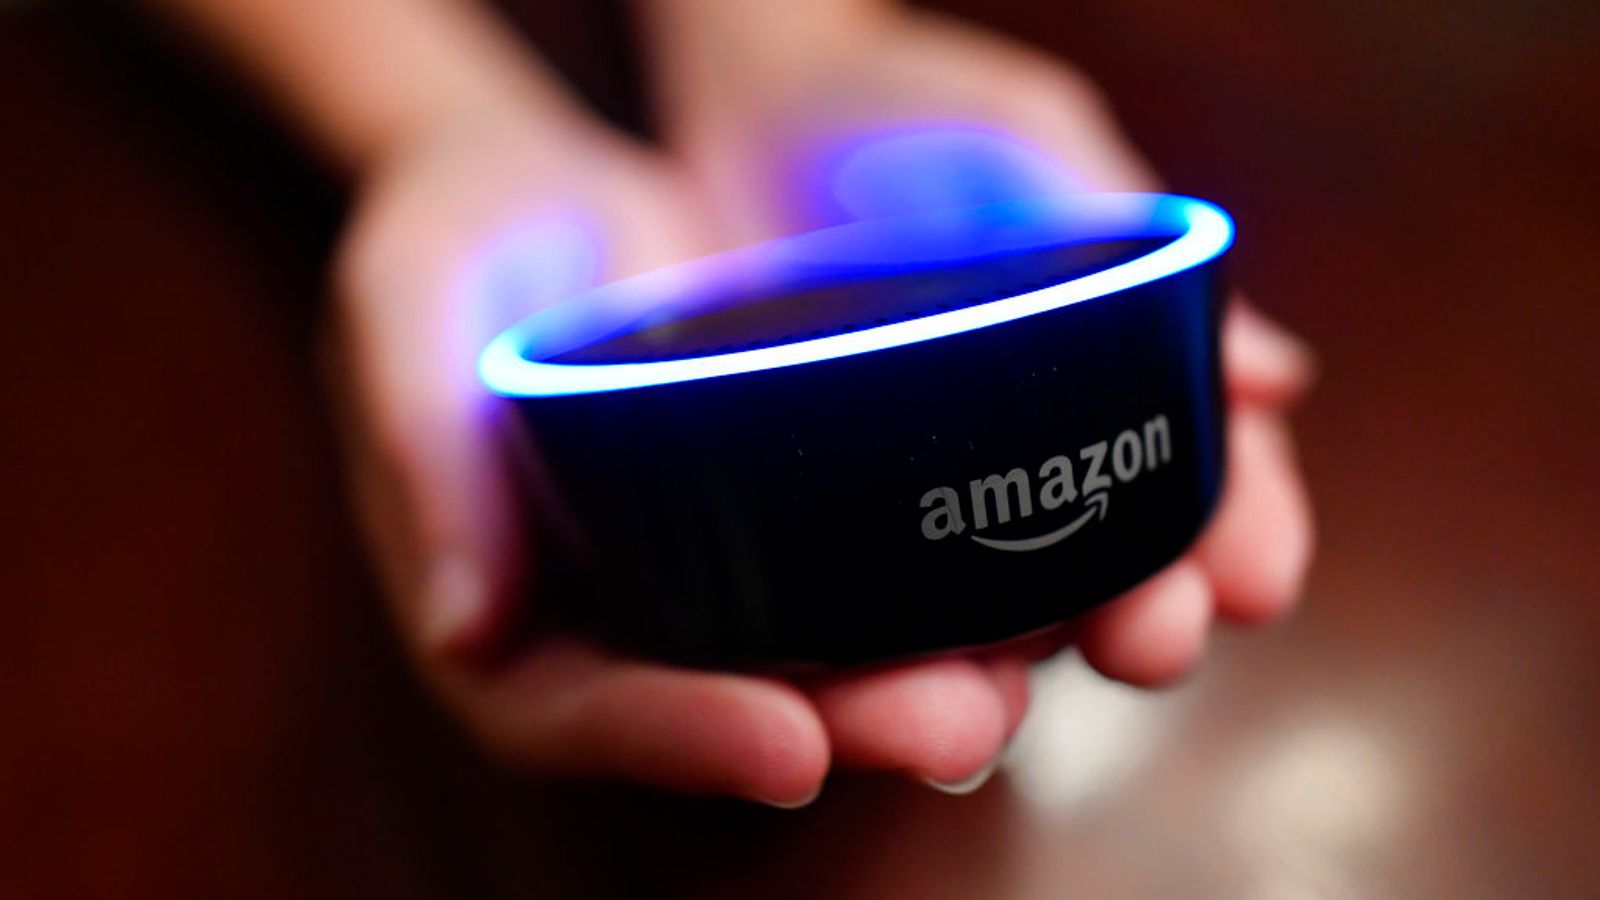 Amazon to Pay $25 Million to Settle Privacy Cases Brought by FTC Against Alexa and Ring